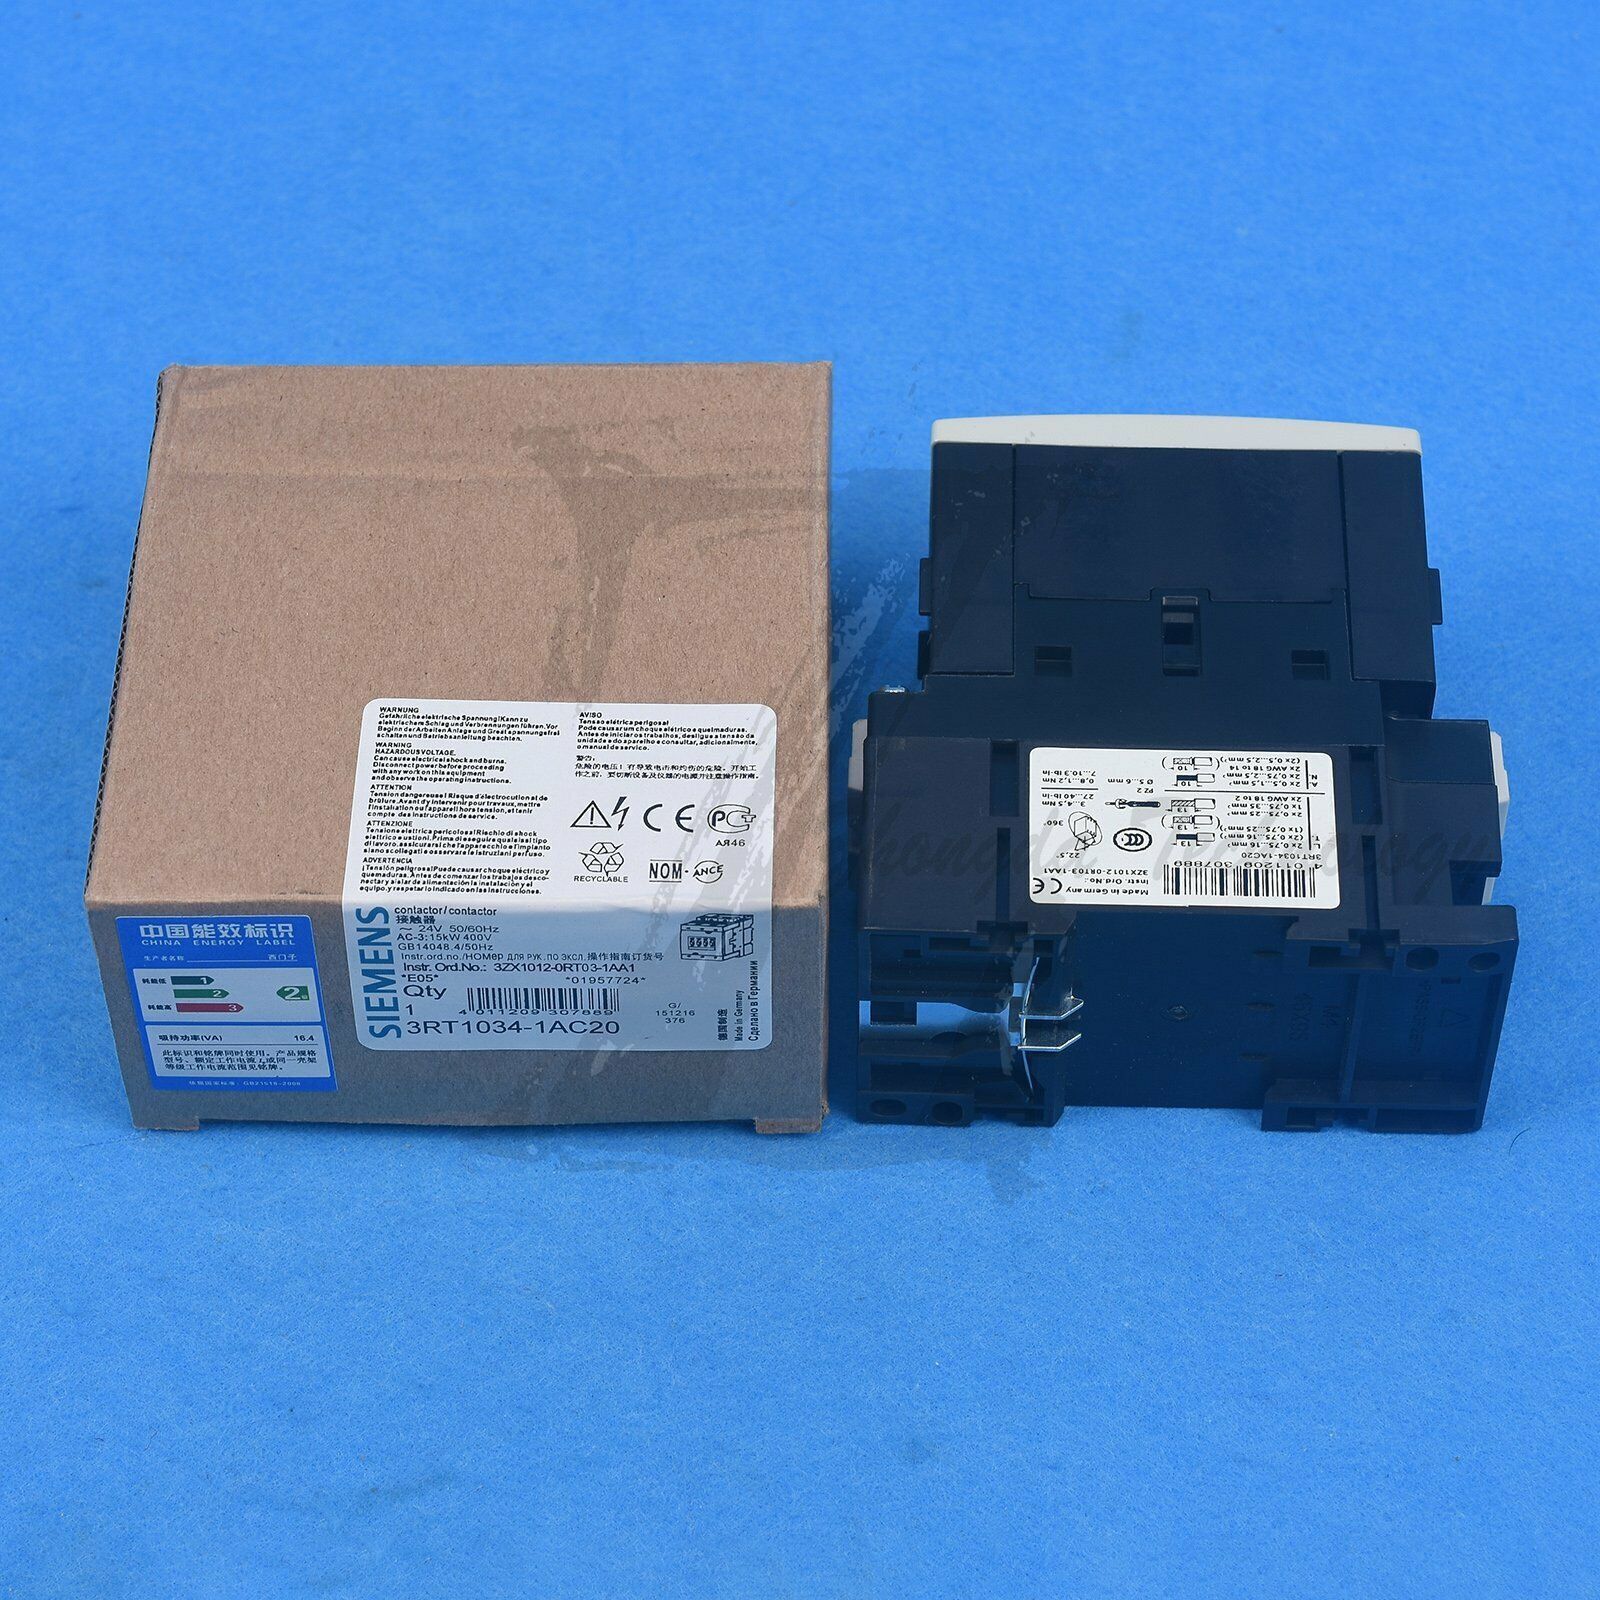 1PCS NEW SIEMENS 3RT1034-1AC20 CONTACTOR 32 AMP 3 POLE 24 VAC Free shipping KOEED 101-200, 90%, import_2020_10_10_031751, Other, Siemens